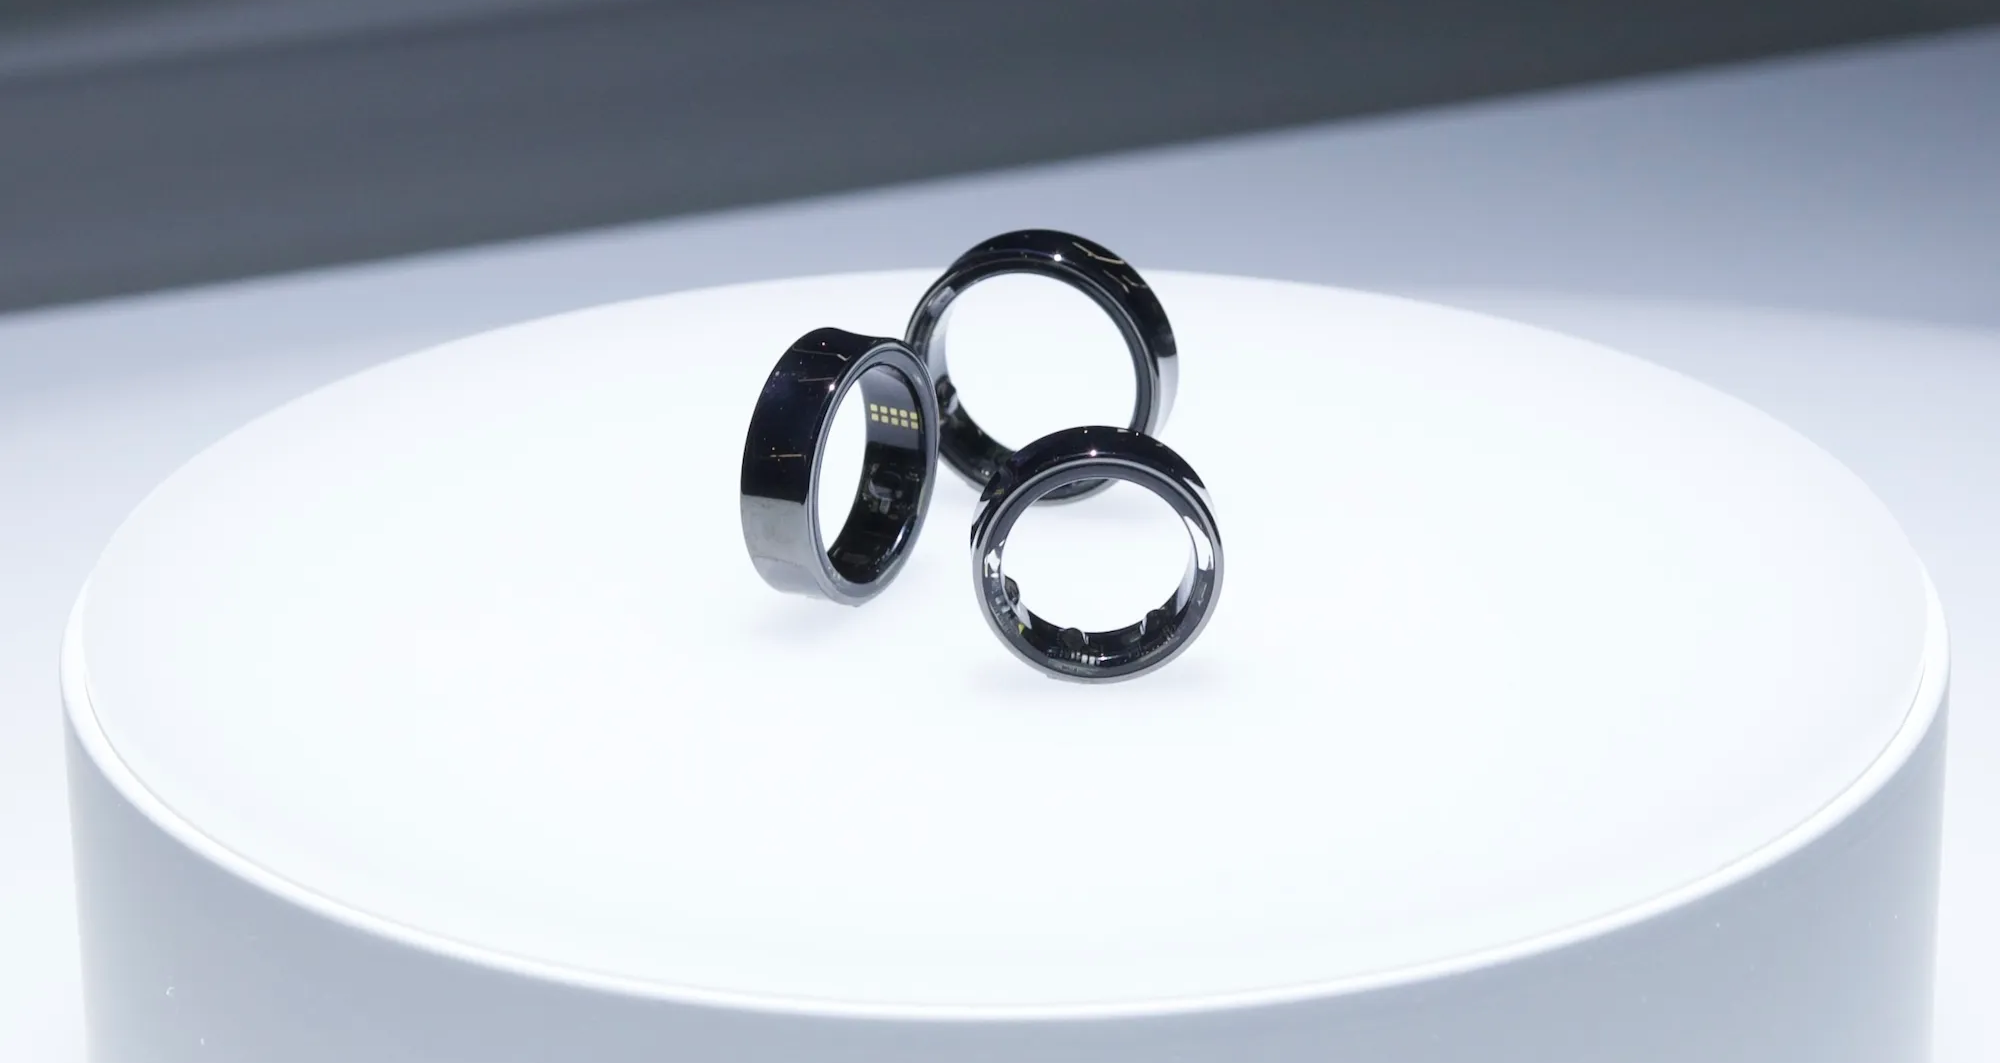 Magnets and weightlifting: Samsung has revealed when it is not recommended to use the Galaxy Ring